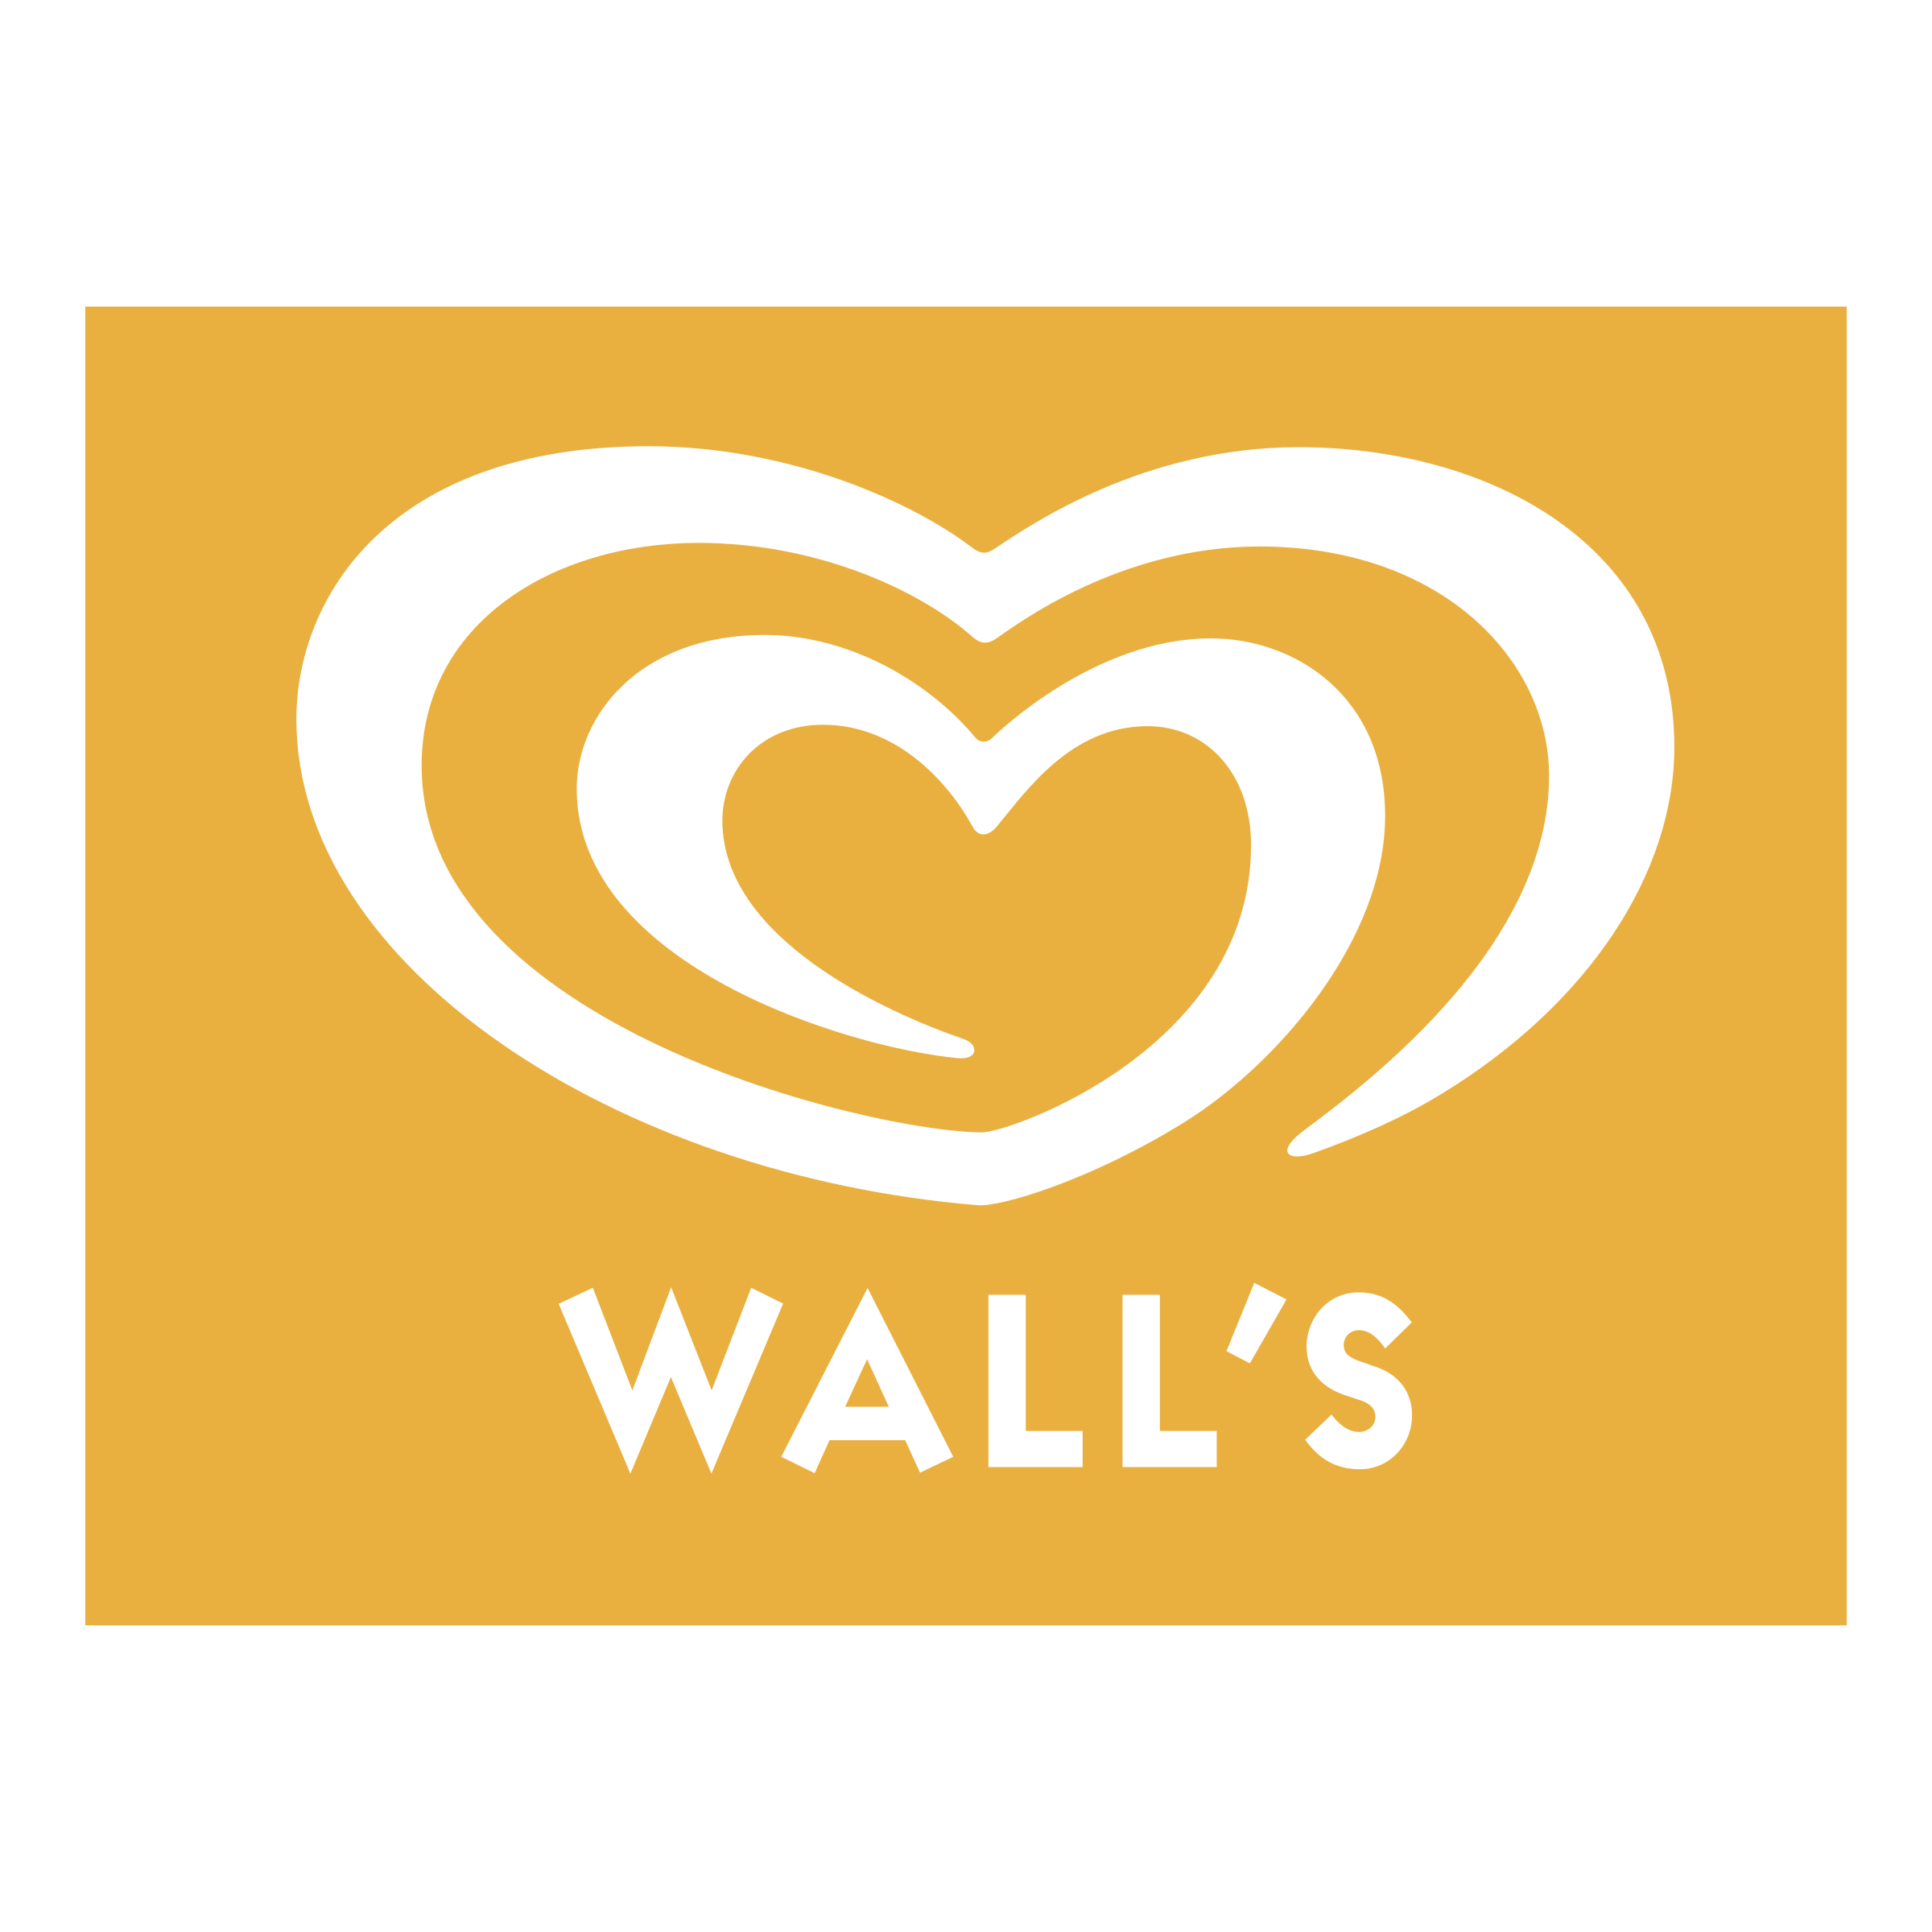 Wall's Logo - Wall's Logo PNG Transparent & SVG Vector - Freebie Supply